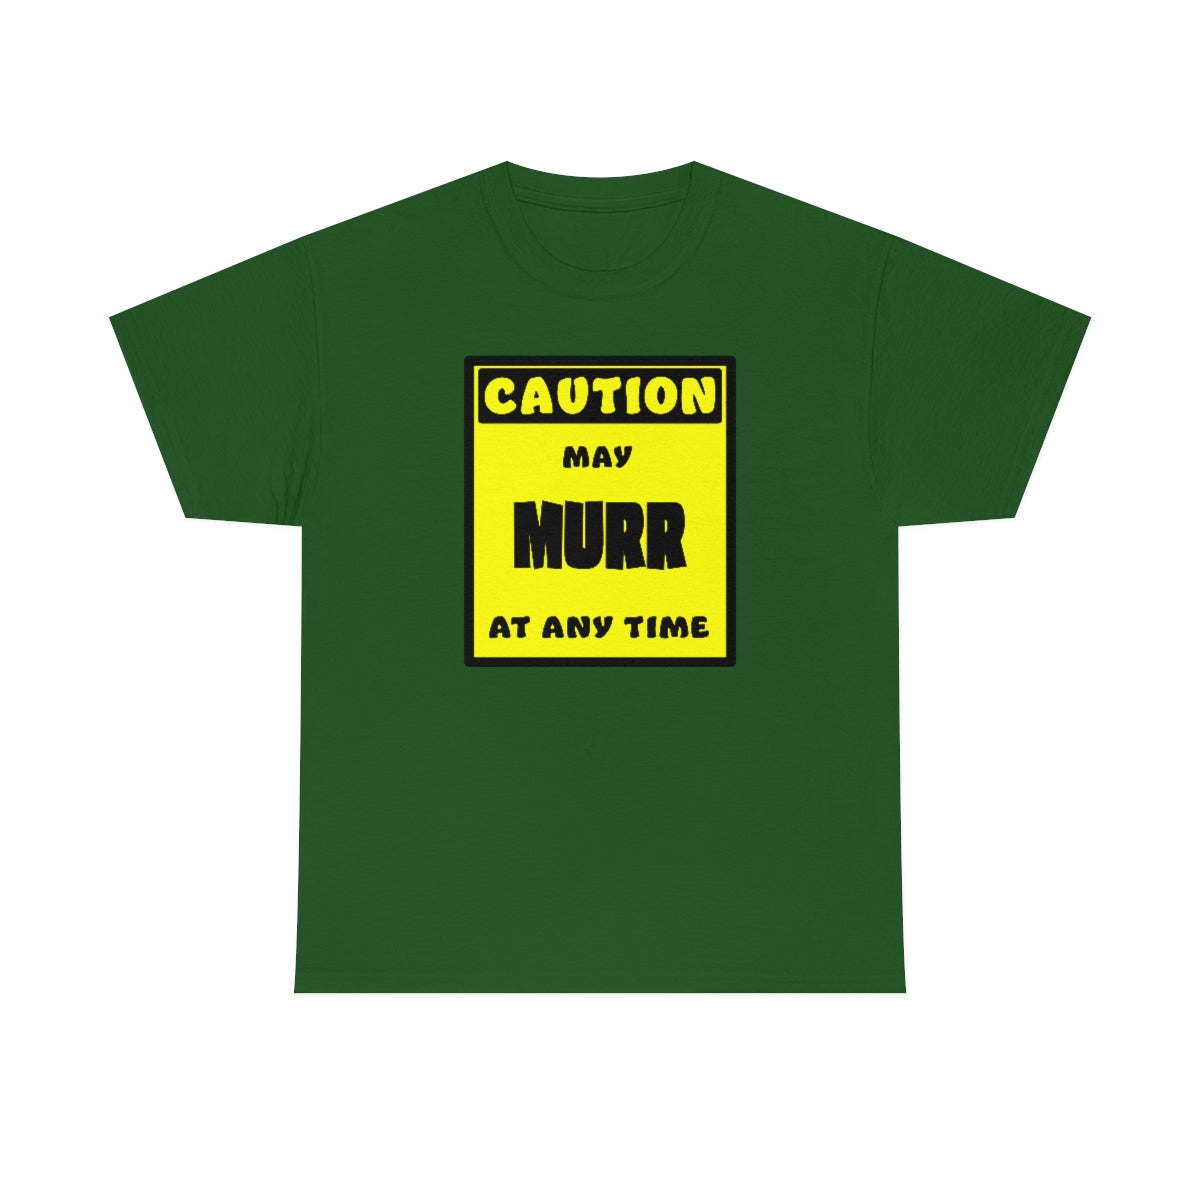 CAUTION! May MURR at any time! - T-Shirt T-Shirt AFLT-Whootorca Green S 